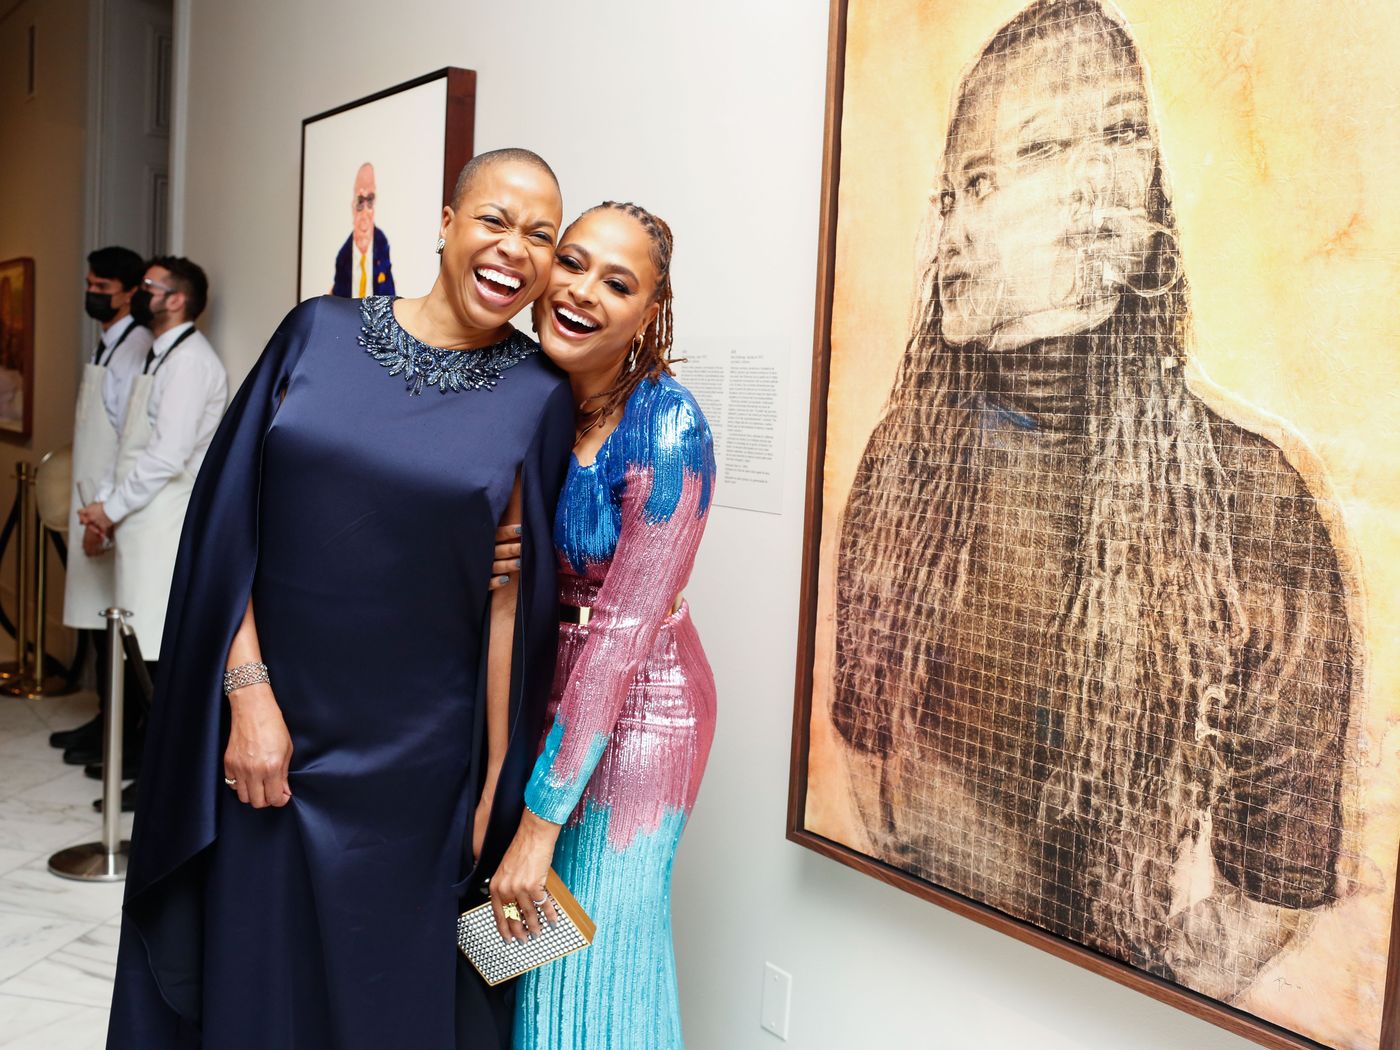 Rhea L. Combs (left) and Ava DuVernay (right) share a laugh in front of DuVernay’s portrait during the National Portrait Gallery's 2022 Portrait of a Nation Gala on Saturday, November 12, 2022.